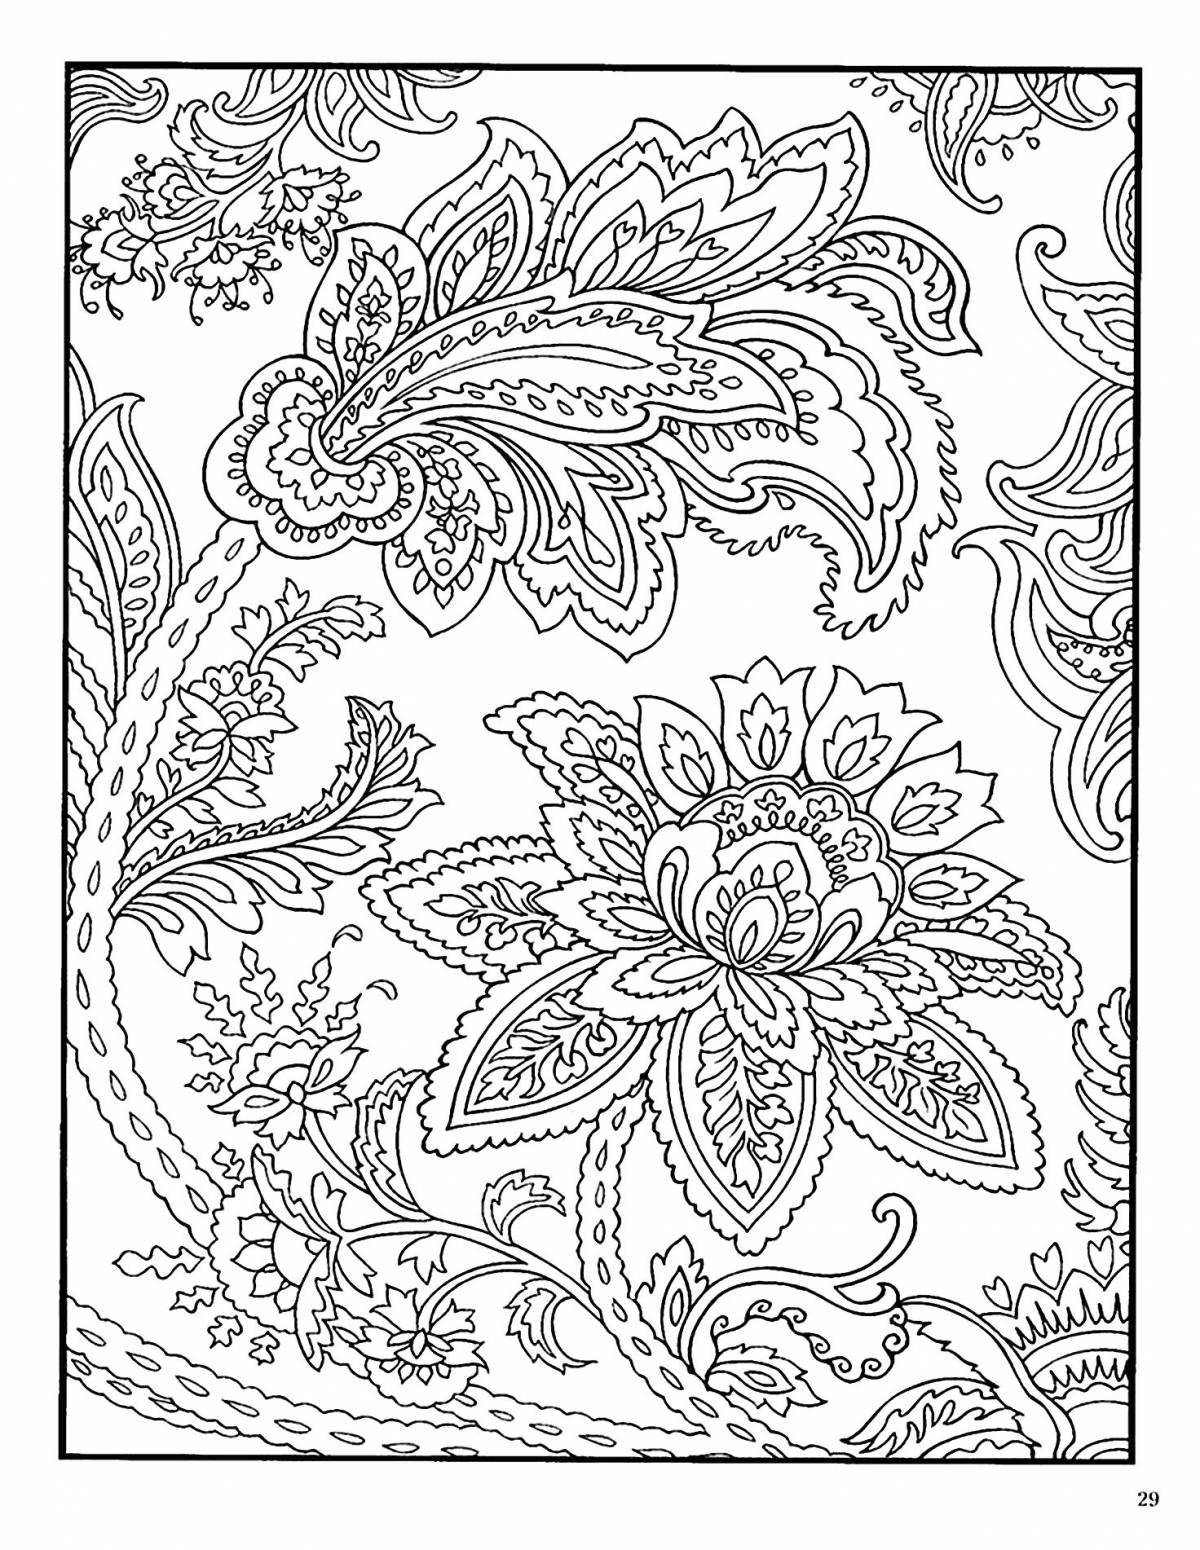 Sparkly soothing coloring pages